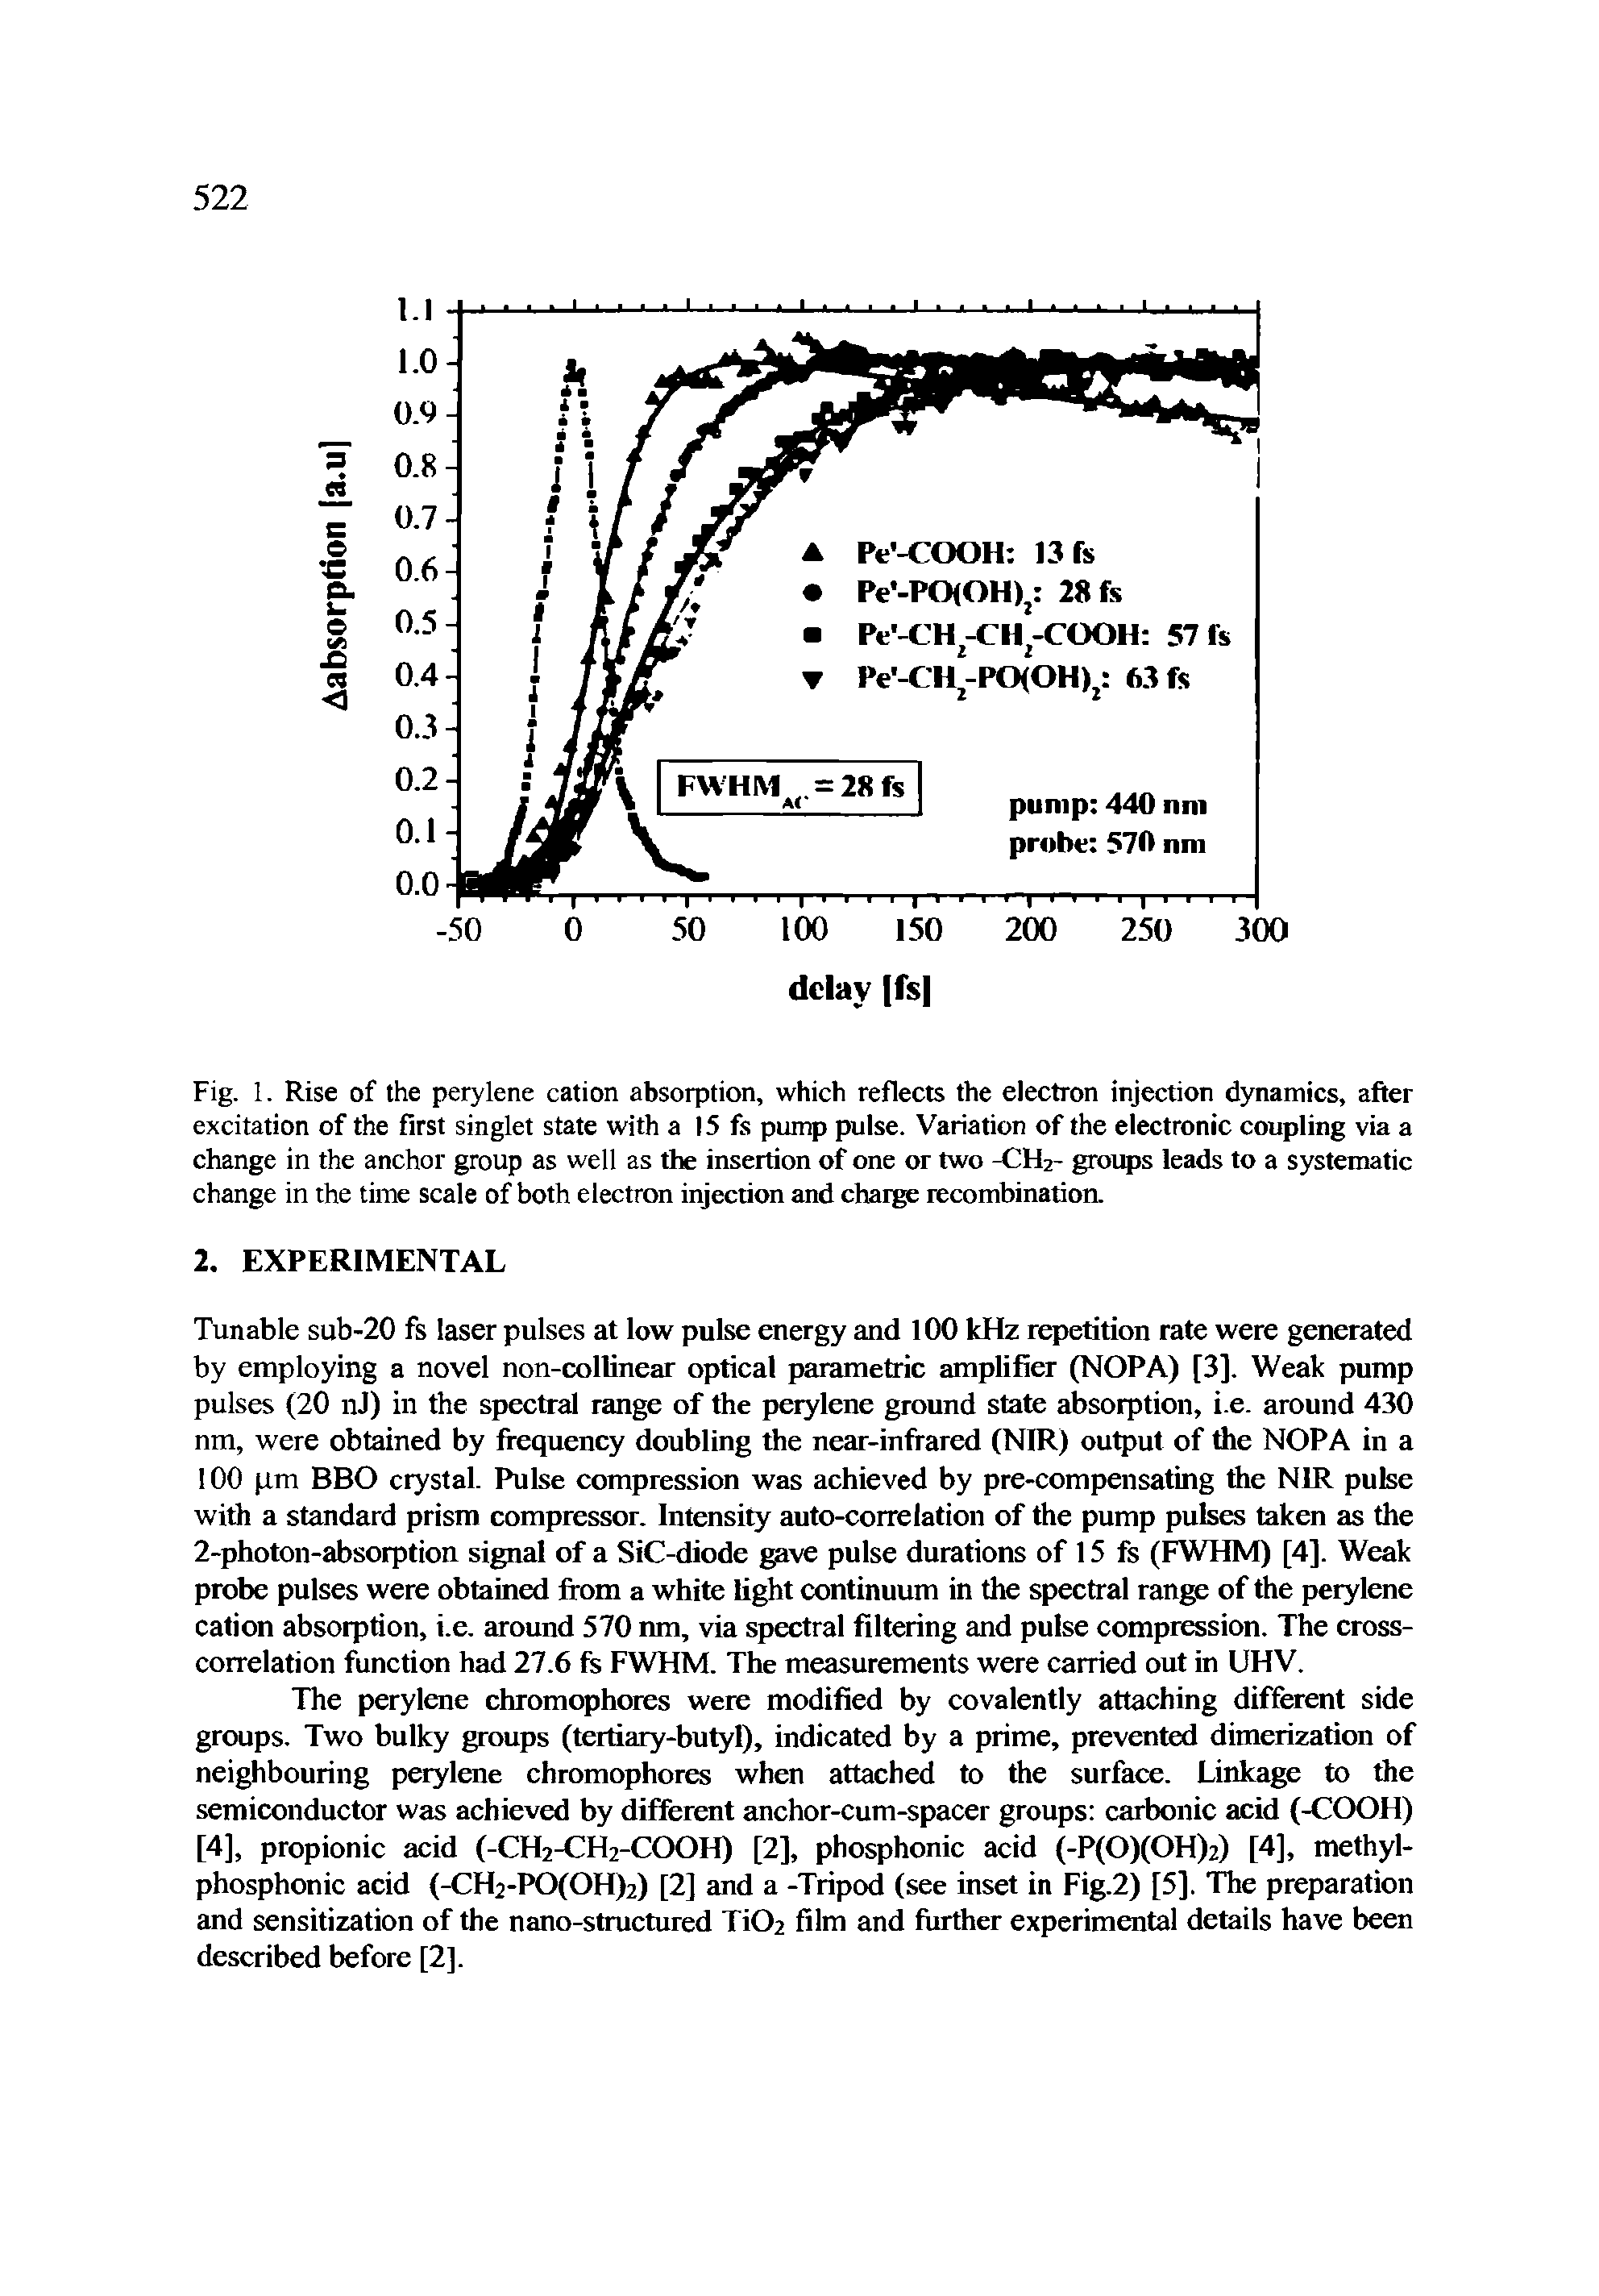 Fig. 1. Rise of the perylene cation absorption, which reflects the electron injection dynamics, after excitation of the first singlet state with a 15 fs pump pulse. Variation of the electronic coupling via a change in the anchor group as well as the insertion of one or two -CH2- groups leads to a systematic change in the time scale of both electron injection and charge recombination.